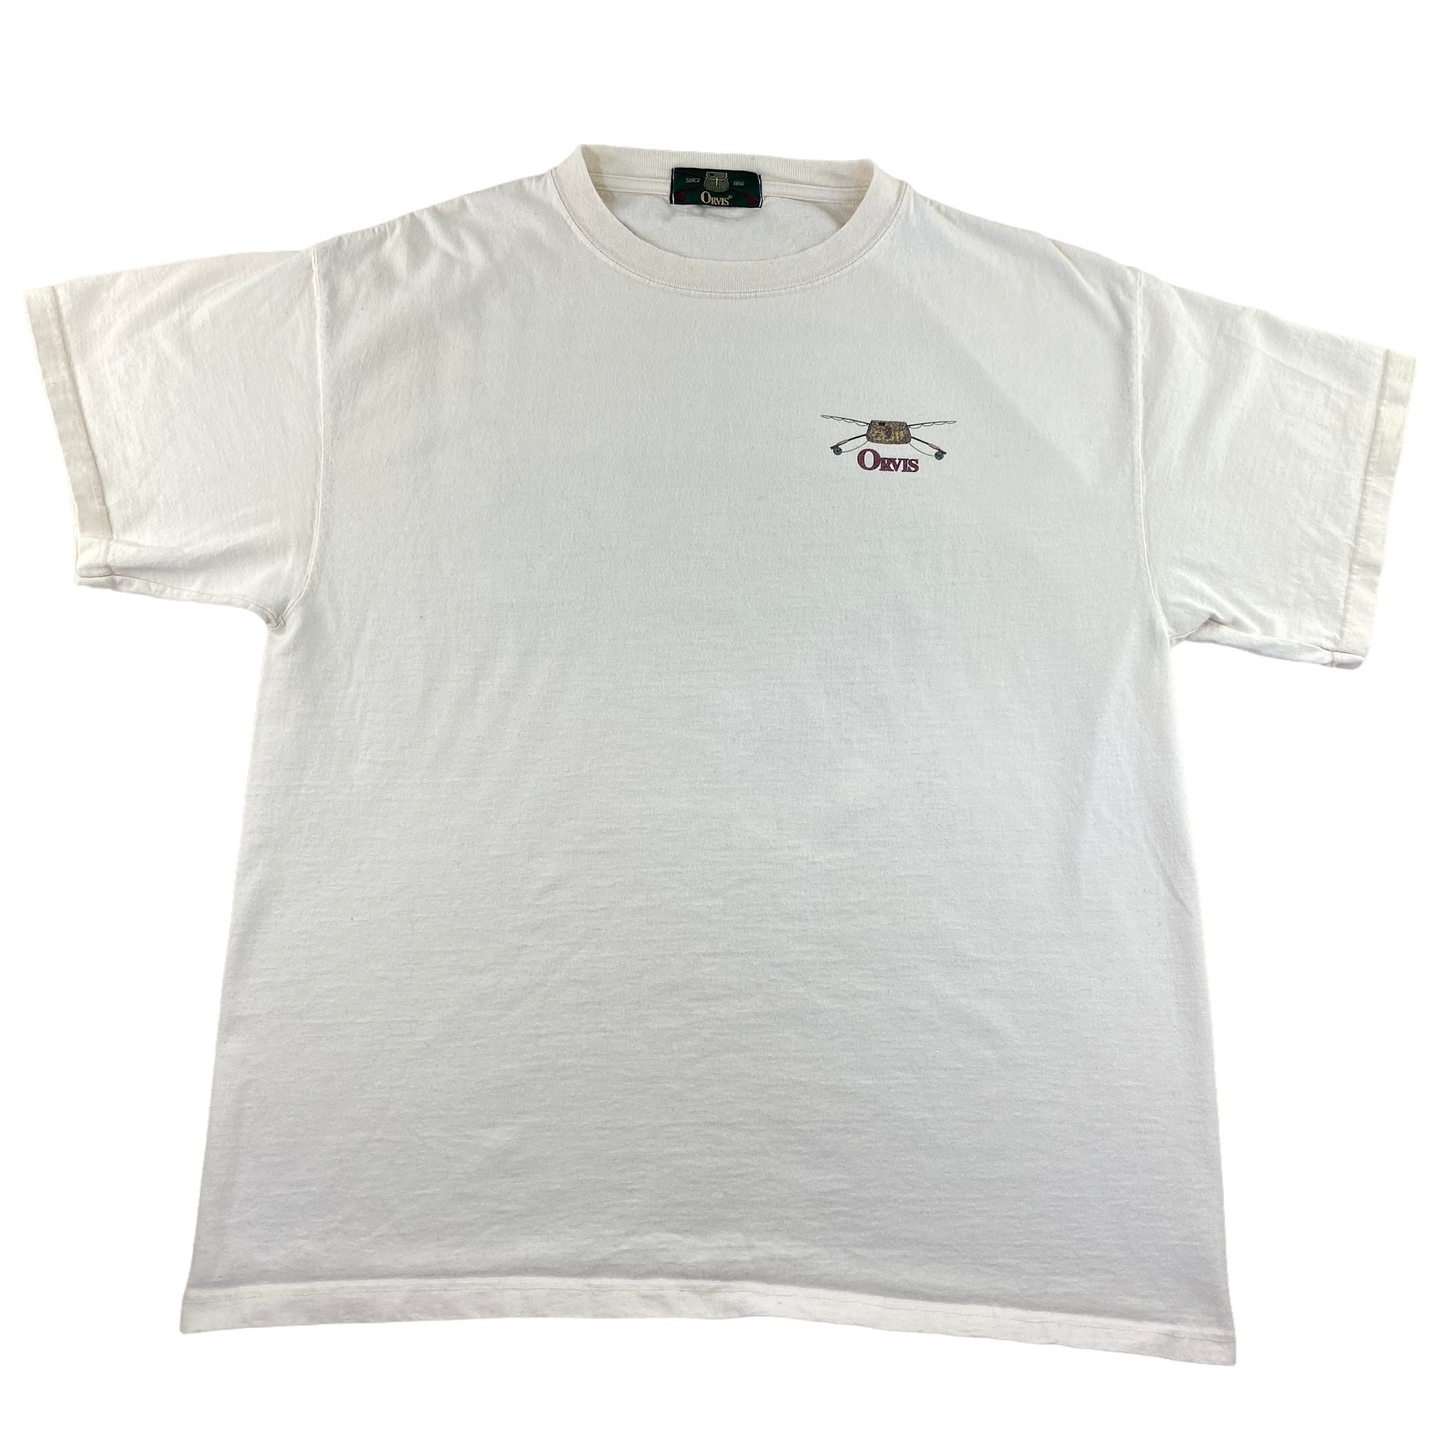 Orvis rod and reel tee XL